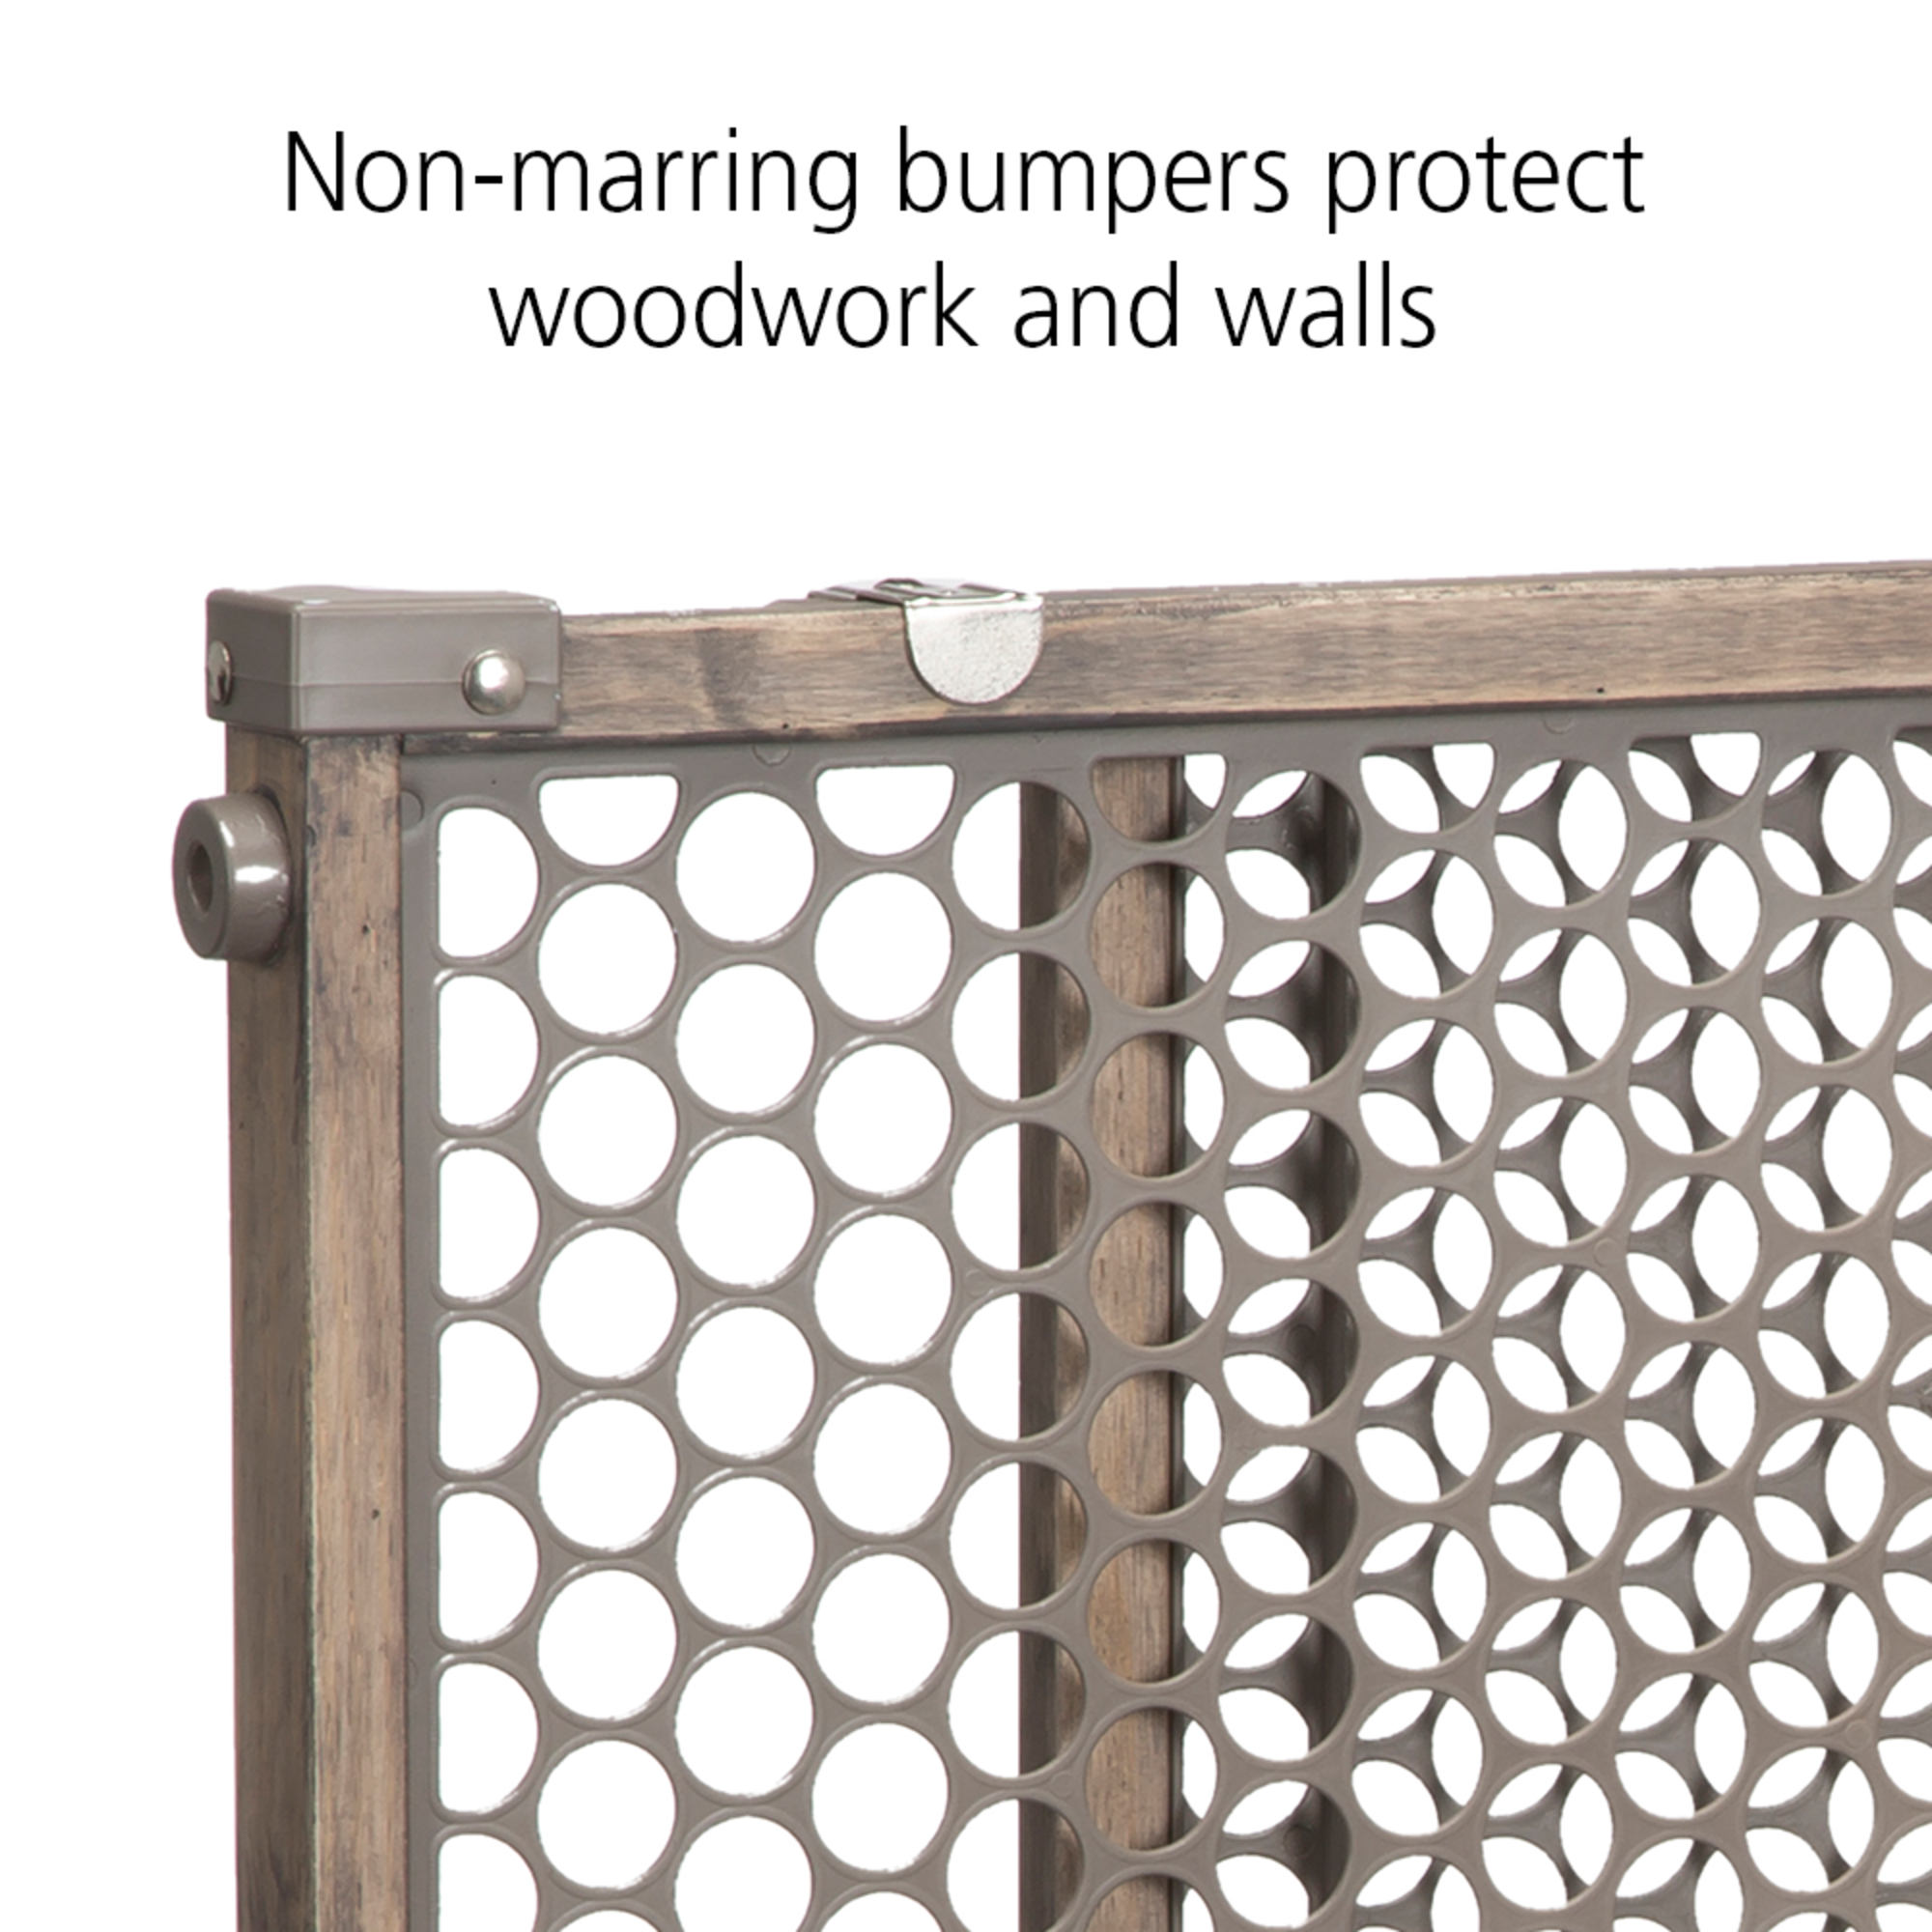 Baby gate with non-marring bumper protect for woodwork and walls.